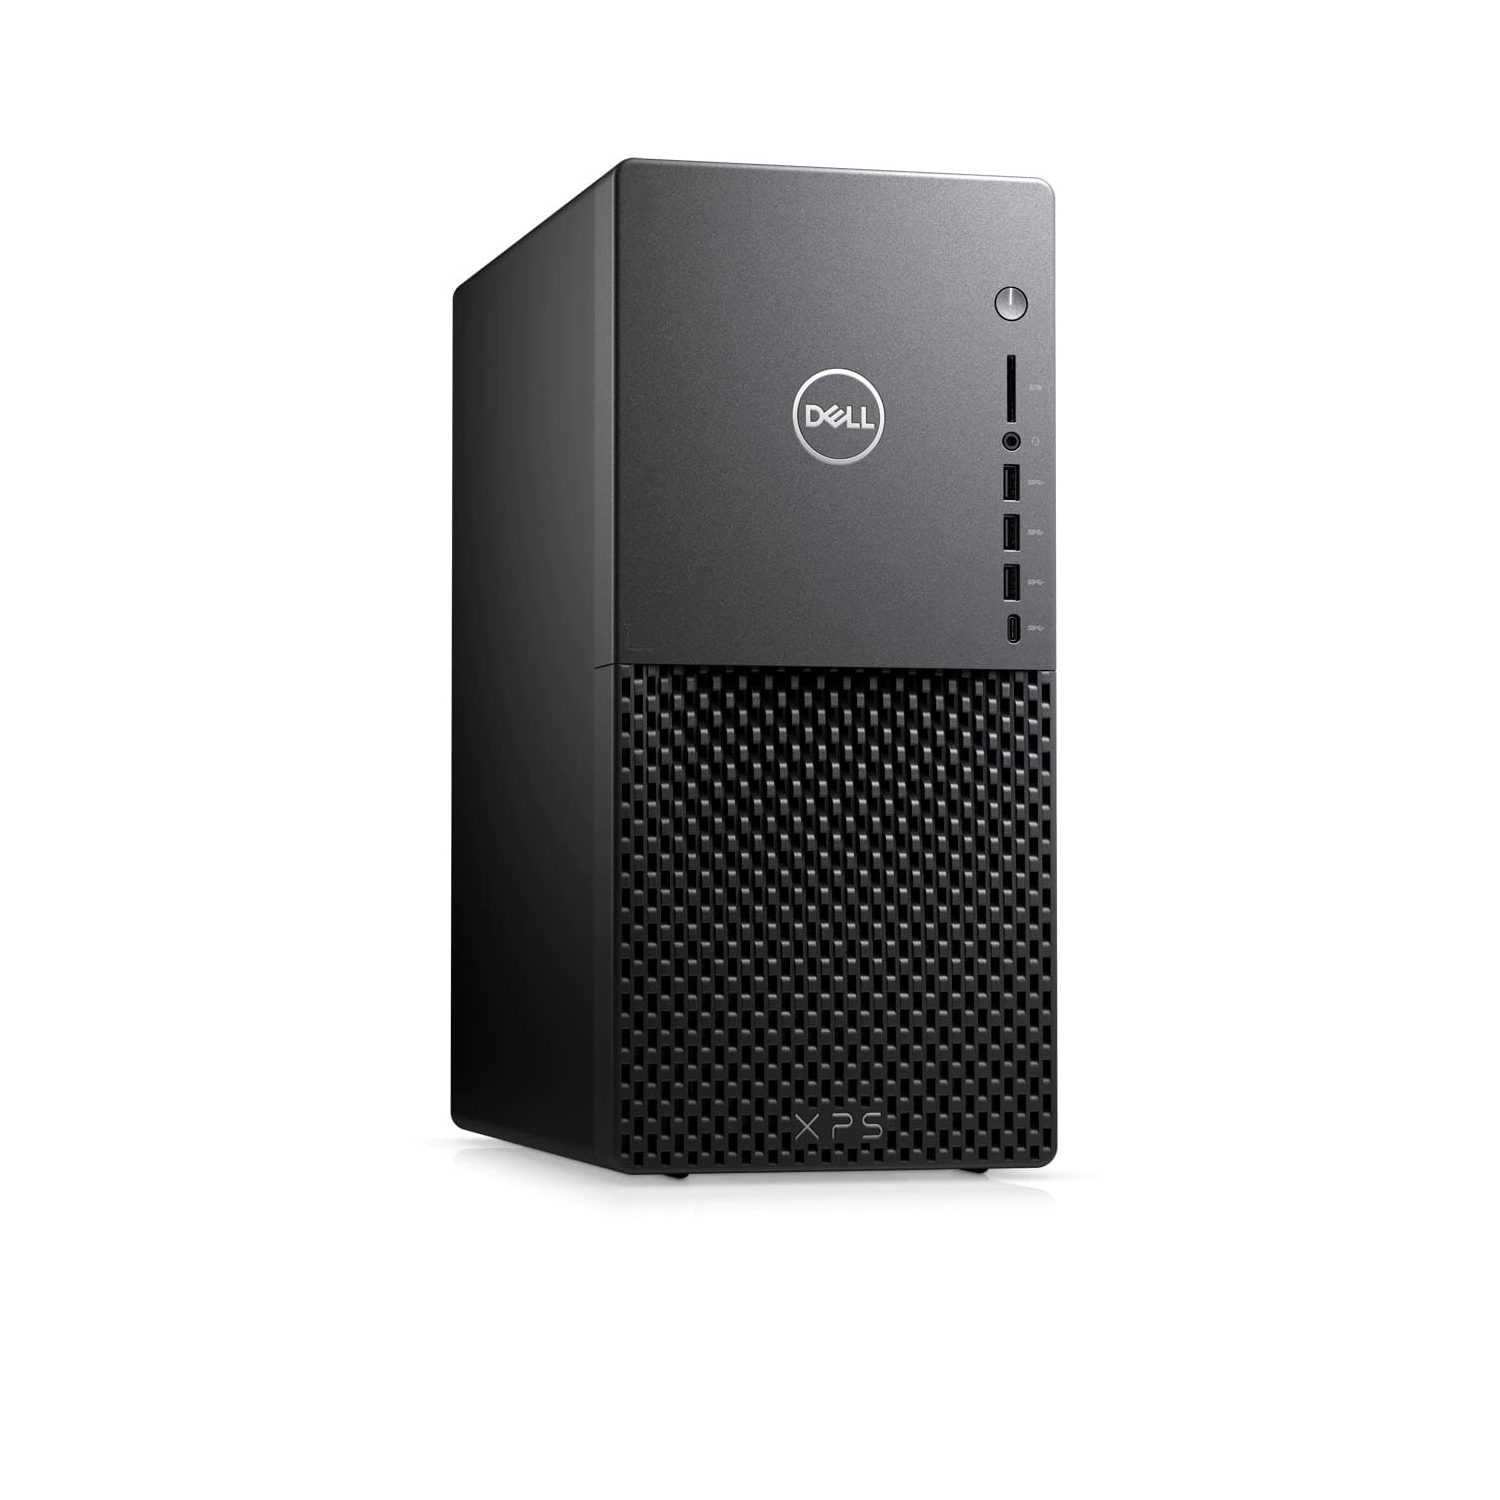 Refurbished (Excellent) - Dell XPS 8940 Desktop (2020) | Core i7 - 2TB HDD + 1TB SSD - 32GB RAM - 2060 SUPER | 8 Cores @ 4.8 GHz - 10th Gen CPU Certified Refurbished